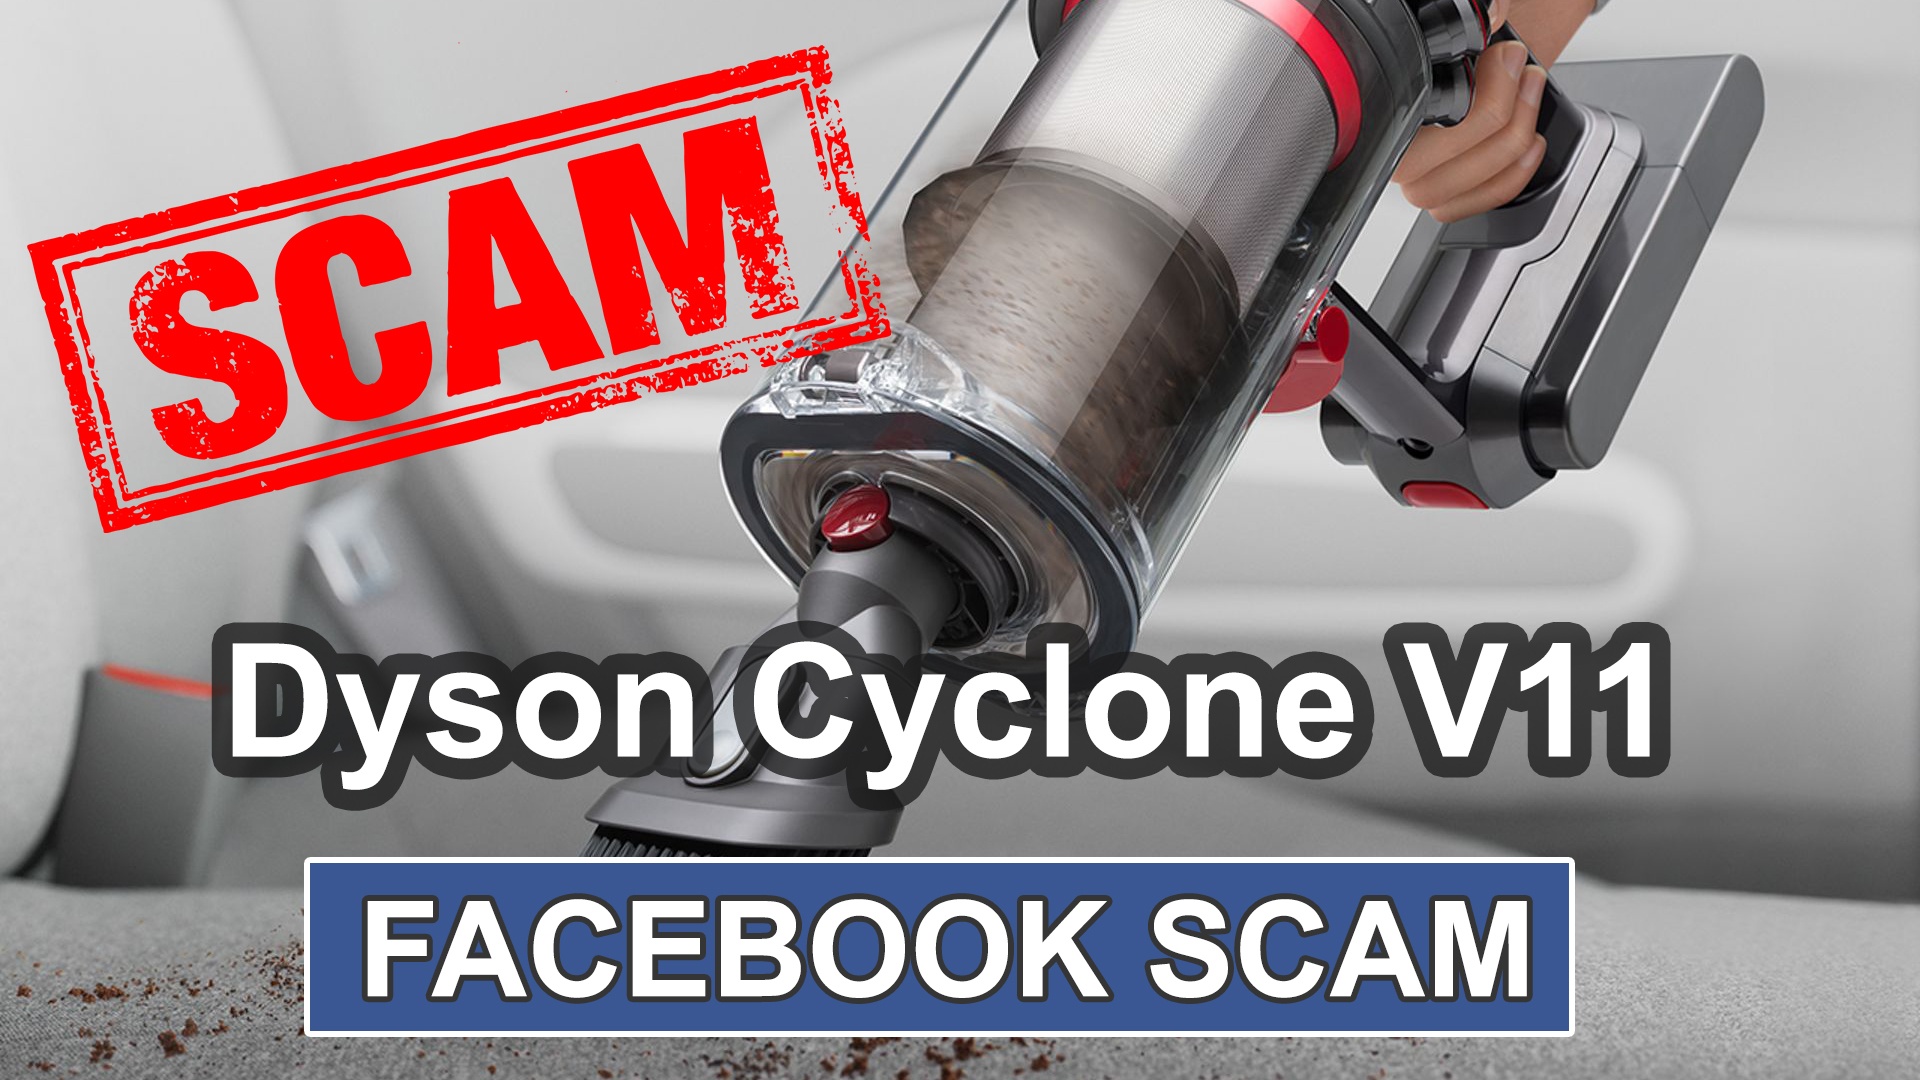 jul snap Sorg Dyson Cyclone V11 $3 Vacuum Cleaner Giveaway on Facebook ⚠️